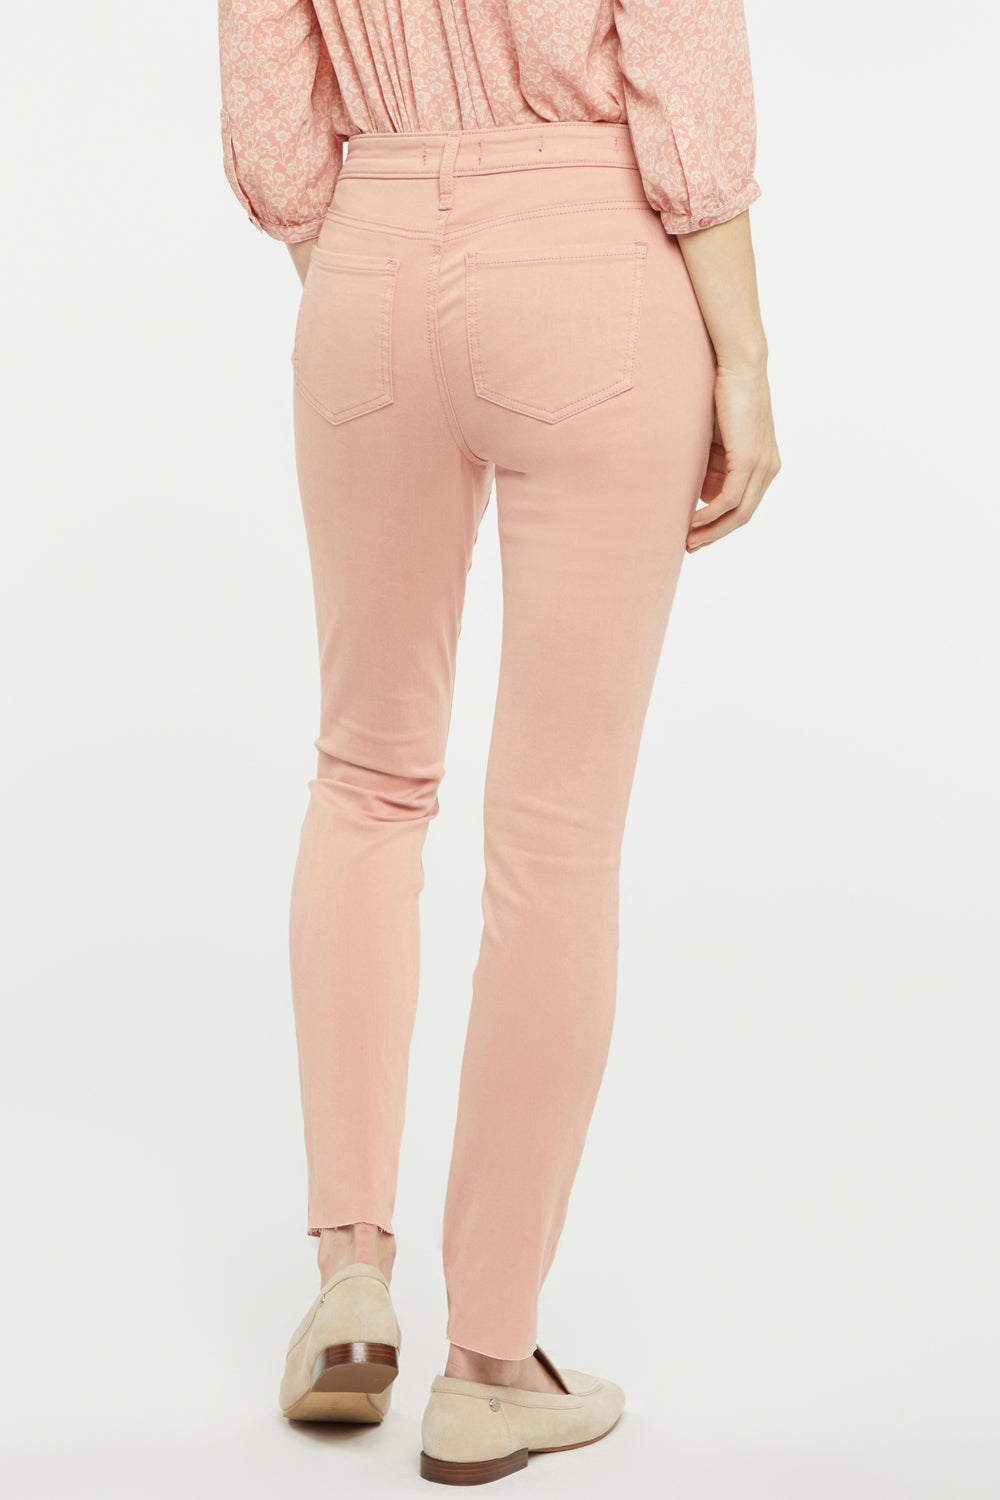 NYDJ Alina Skinny Ankle Jeans In Petite With Raw Hems - Soulmate